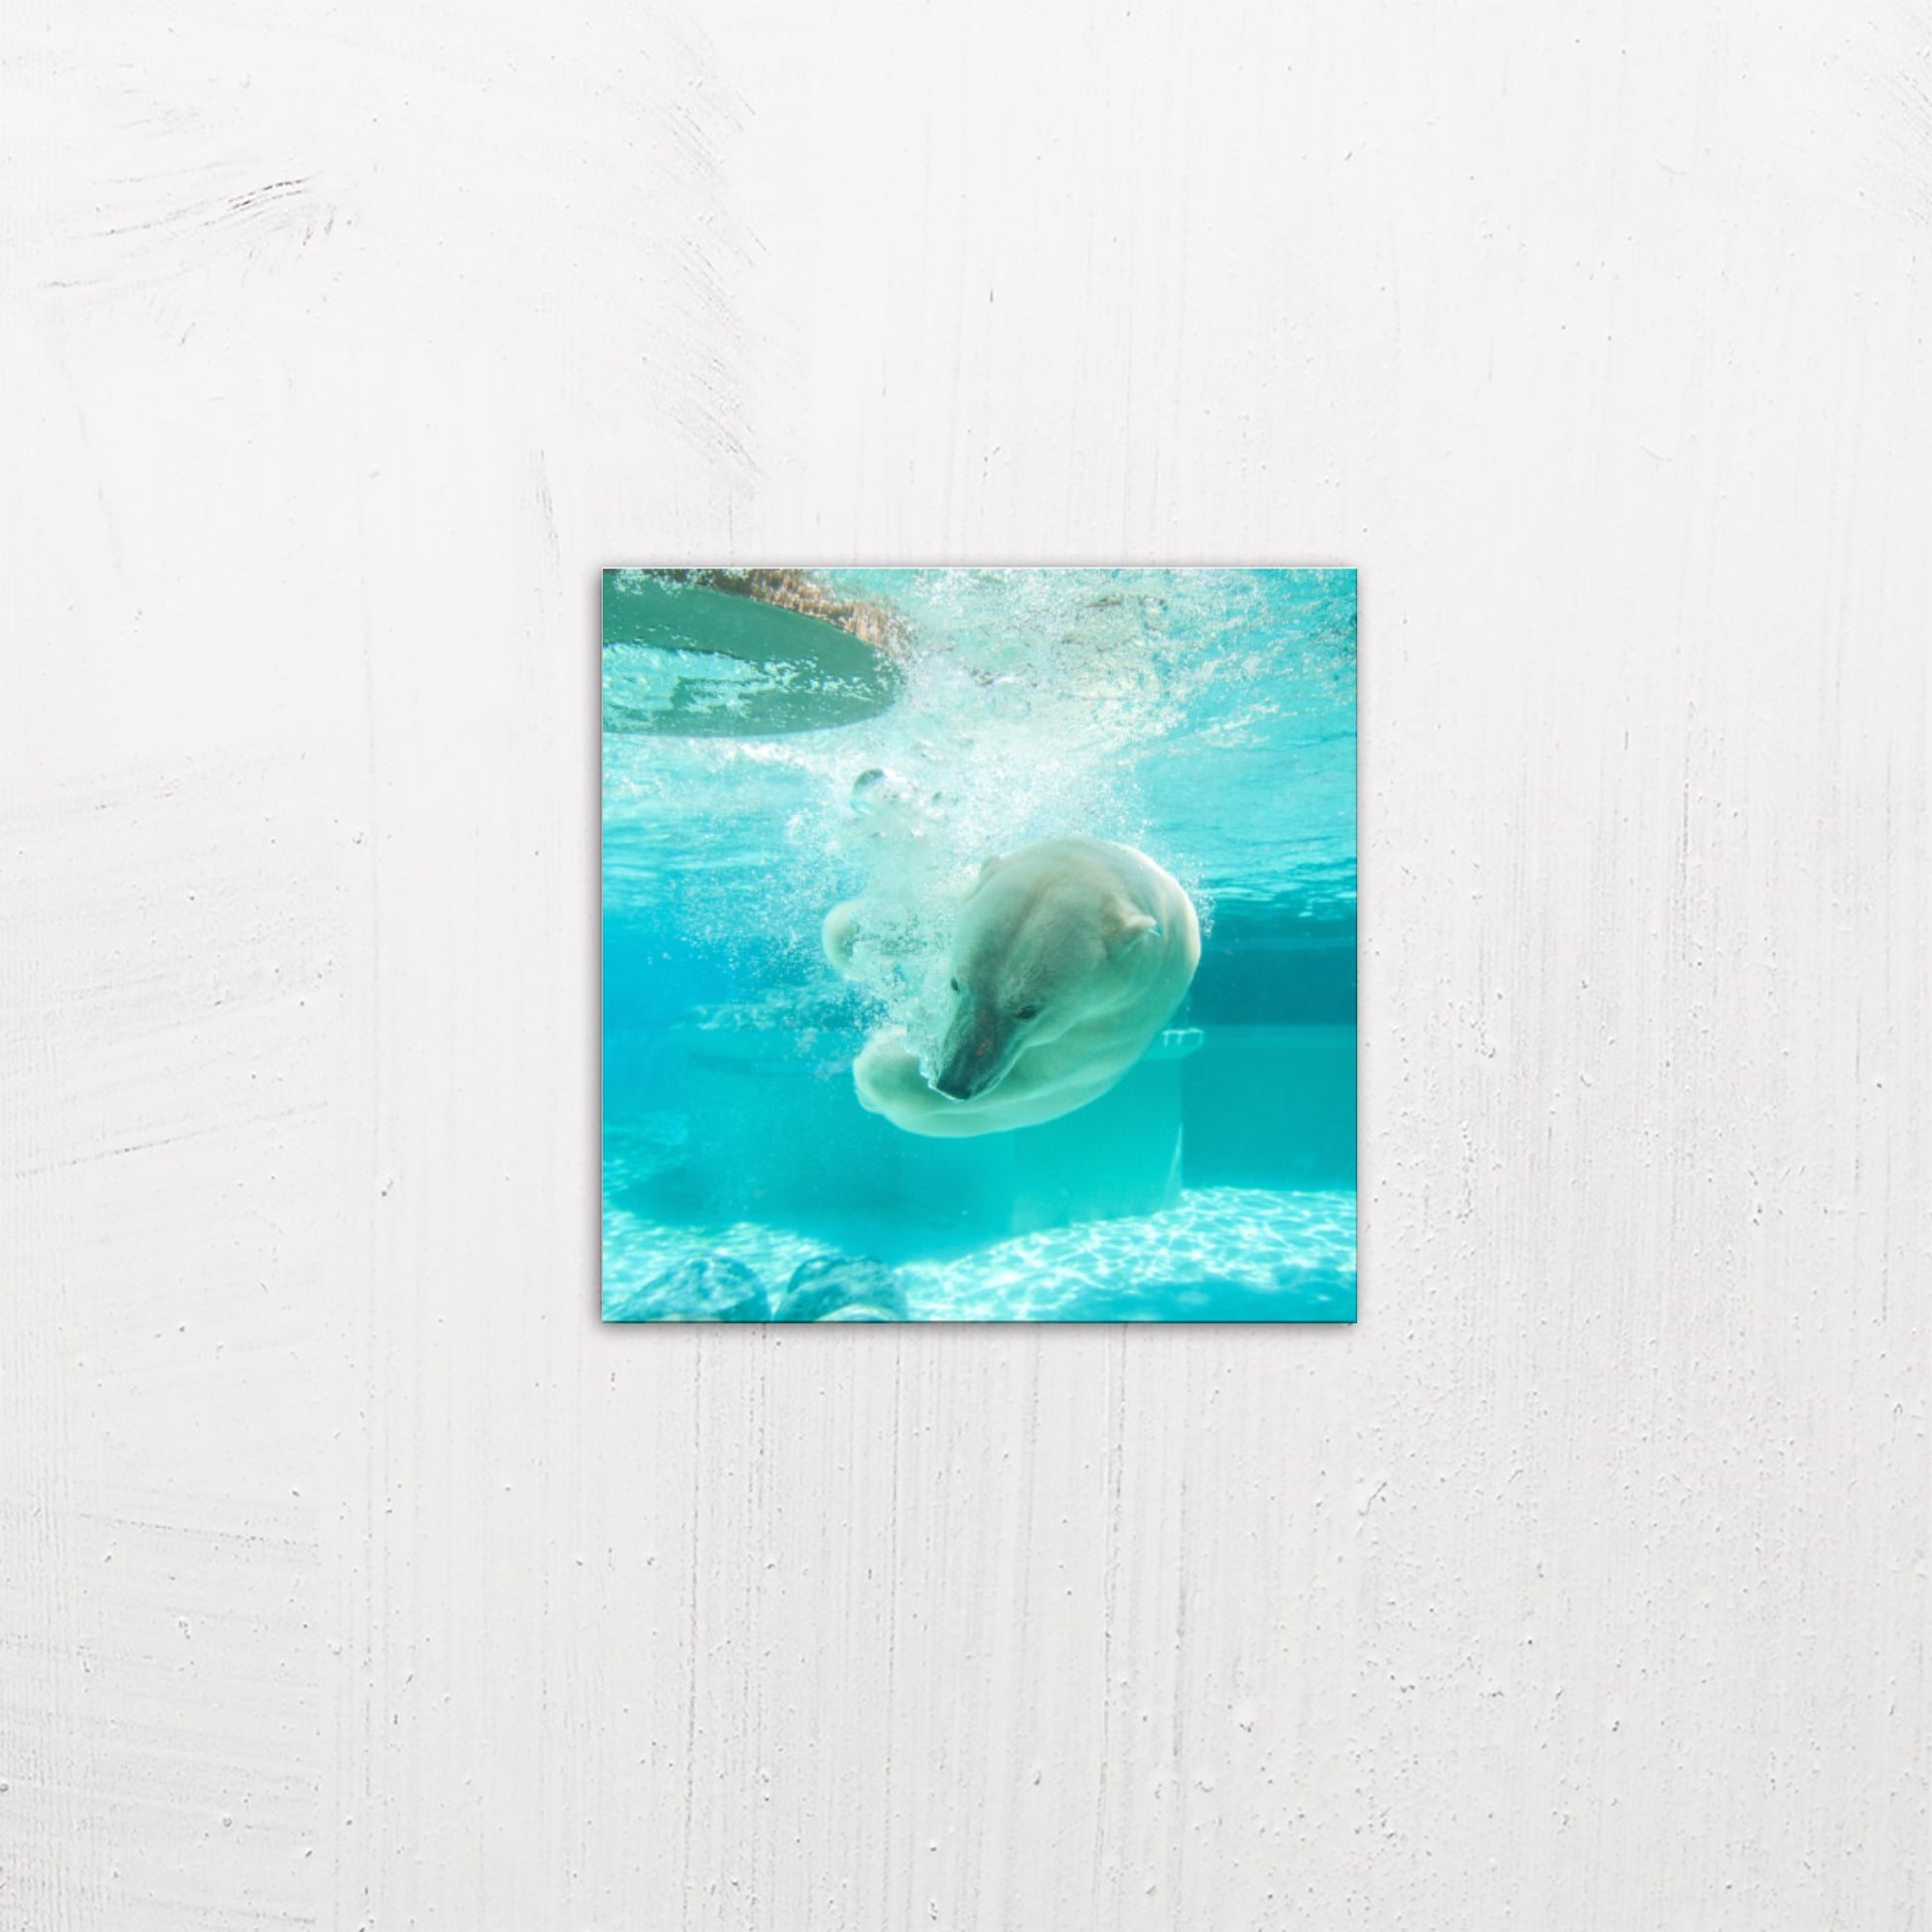 A small size metal art poster display plate with printed design of a Polar Bear Under Water